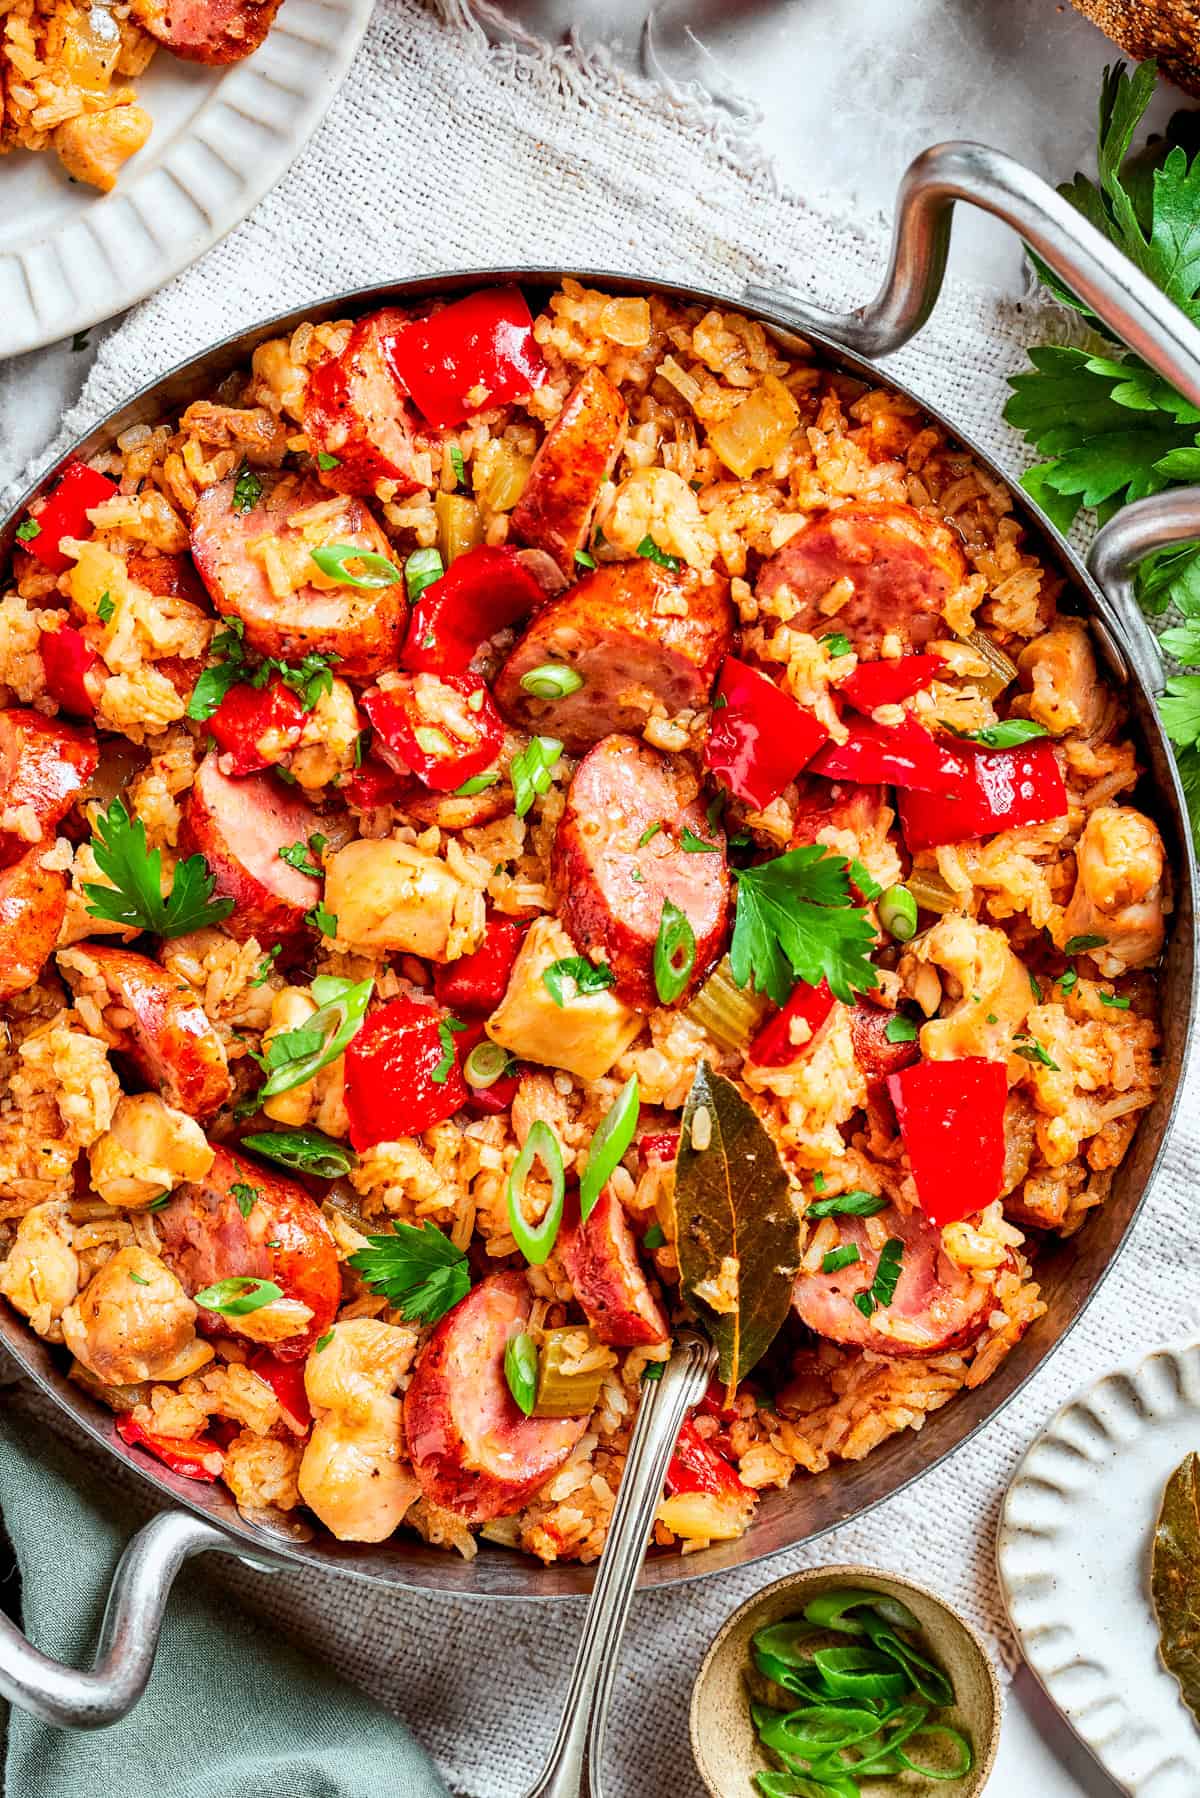 Image of a pan with jambalaya featuring a bed of rice topped with chicken bites, sliced sausages, and diced red bell peppers.